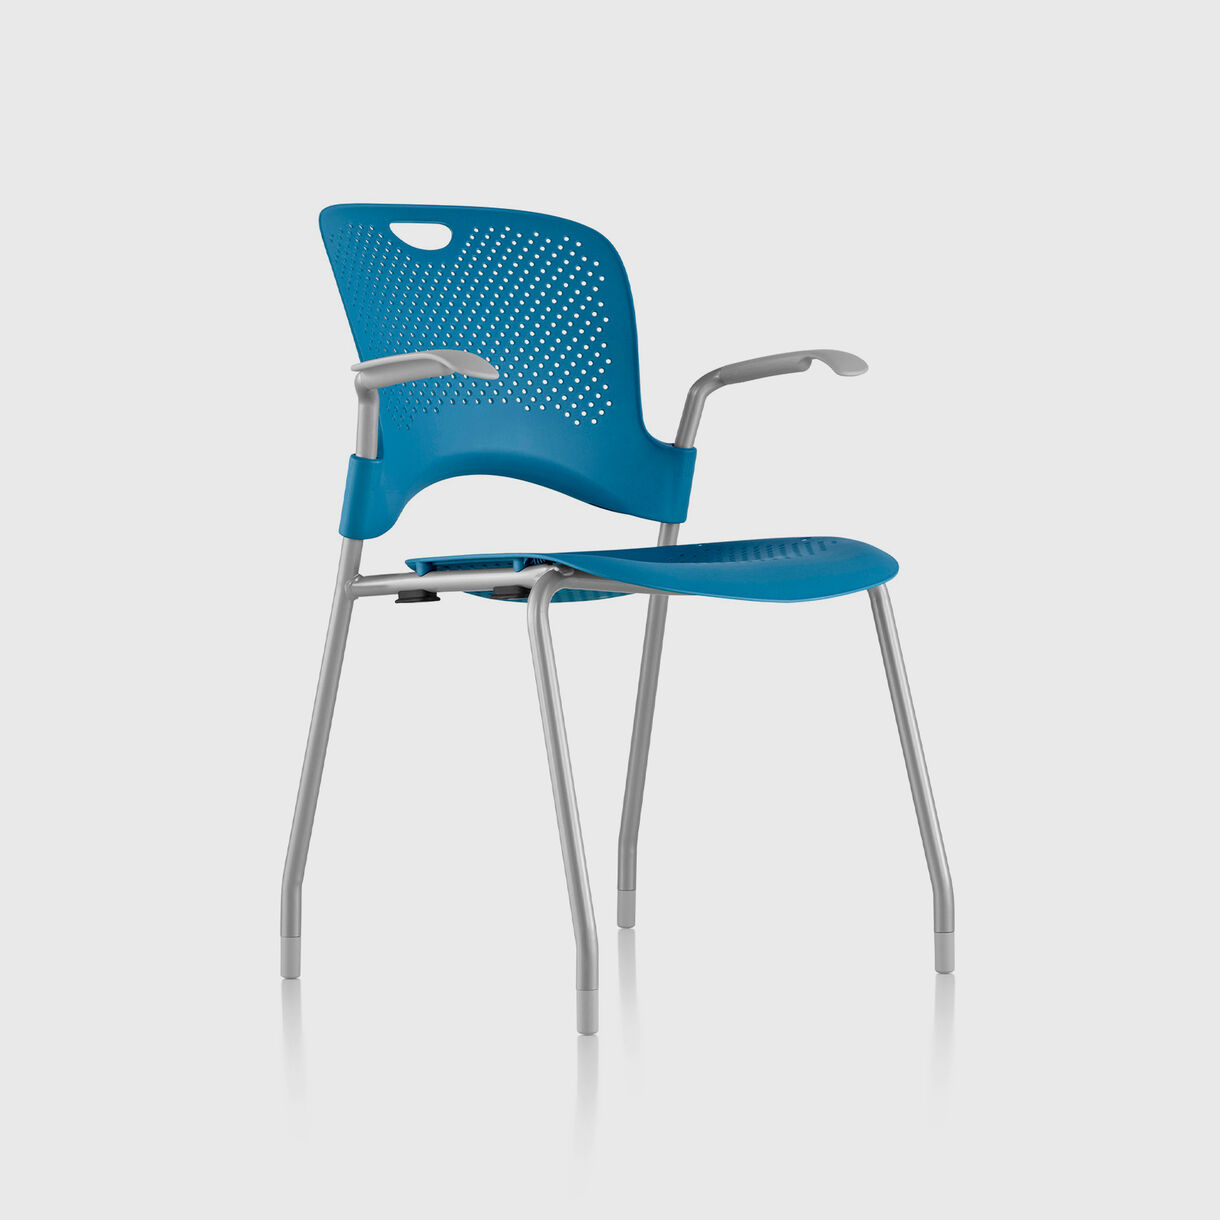 Caper Stacking Chair, Moulded Seat - Berry Blue & Silver with Glides